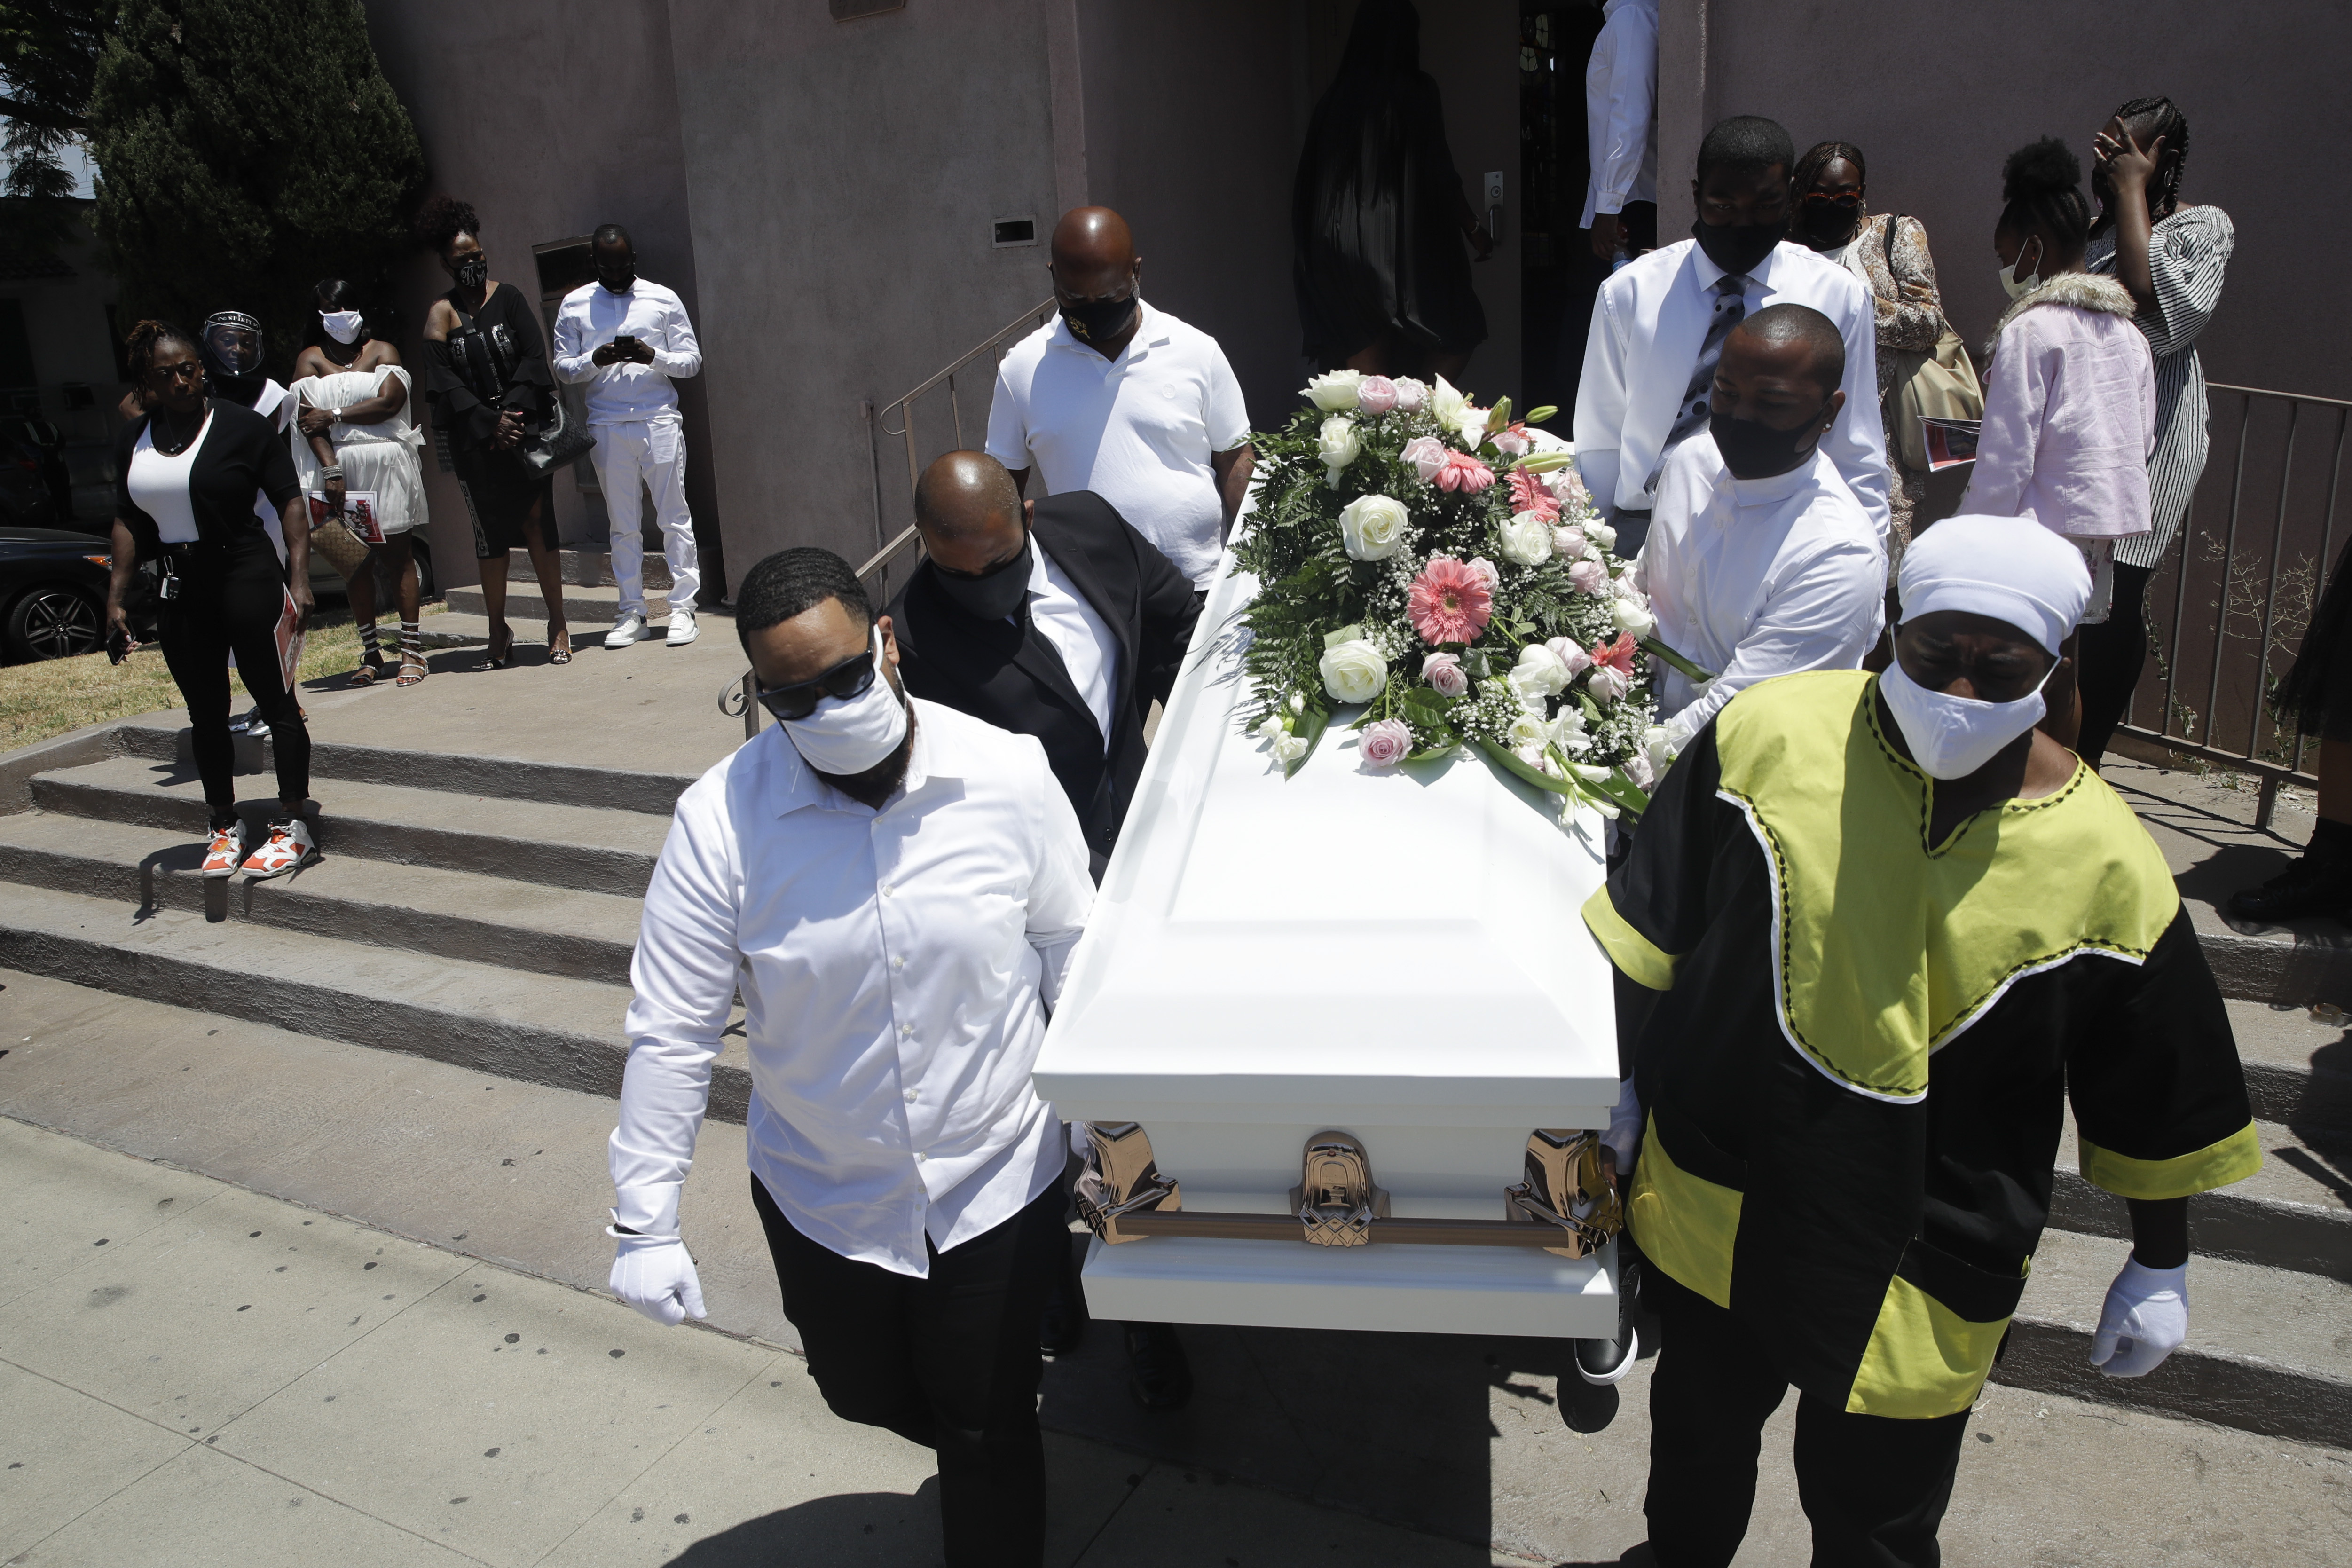 FILE - In this July 21, 2020, file photo, pall bearers carry a casket with the body of Lydia Nunez, who died from COVID-19, after a funeral service at the Metropolitan Baptist Church in Los Angeles. The US death toll from the coronavirus has eclipsed 400,000 in the waning hours in office for President Donald Trump, whose handling of the crisis has been judged by public health experts to be a singular failure. Photo: AP